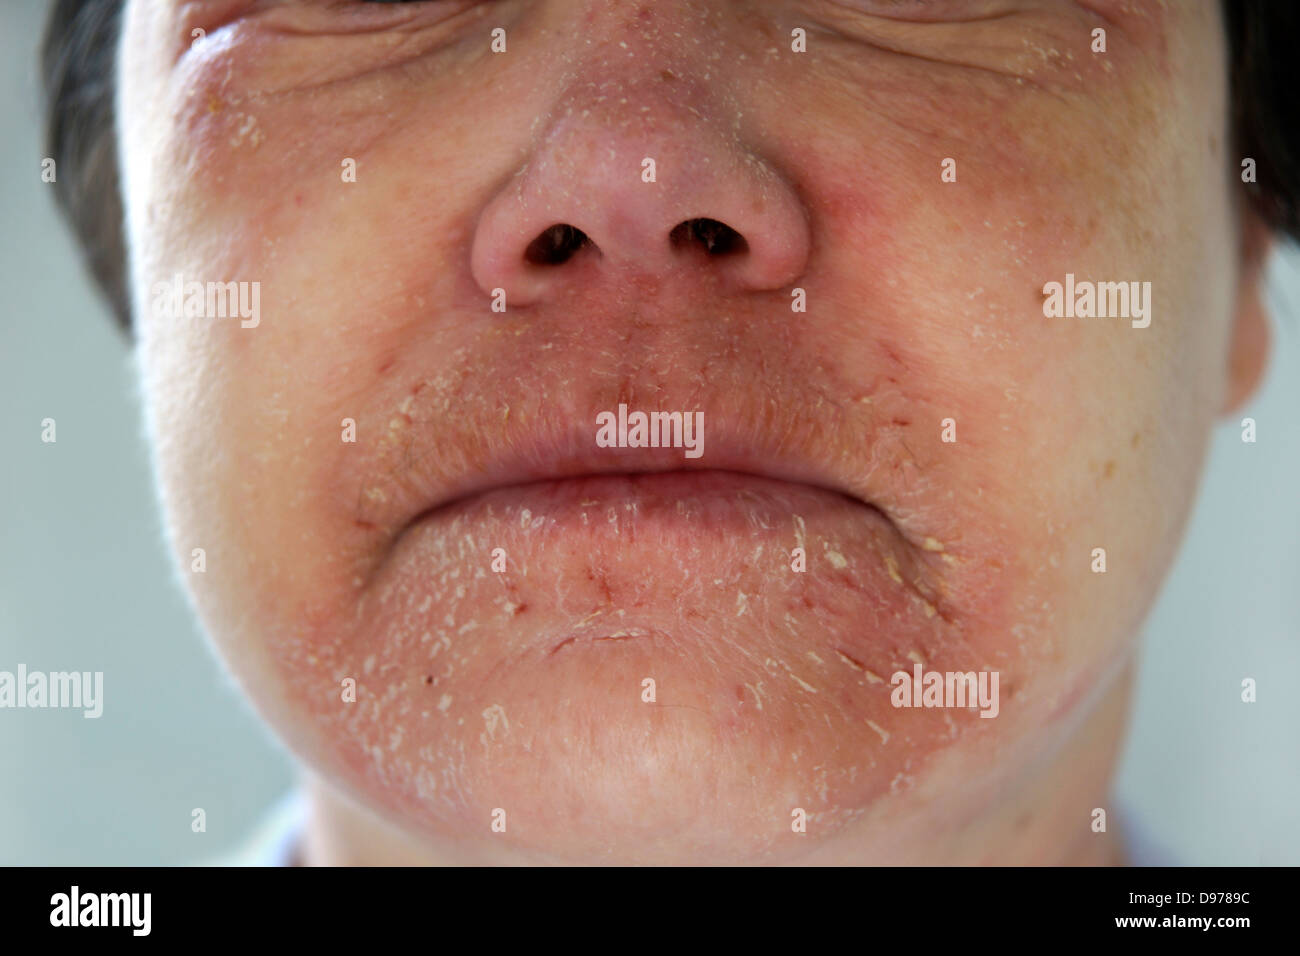 Woman suffering with eczema & a rash covering most of the face with the soreness surrounding & affecting the mouth area Stock Photo